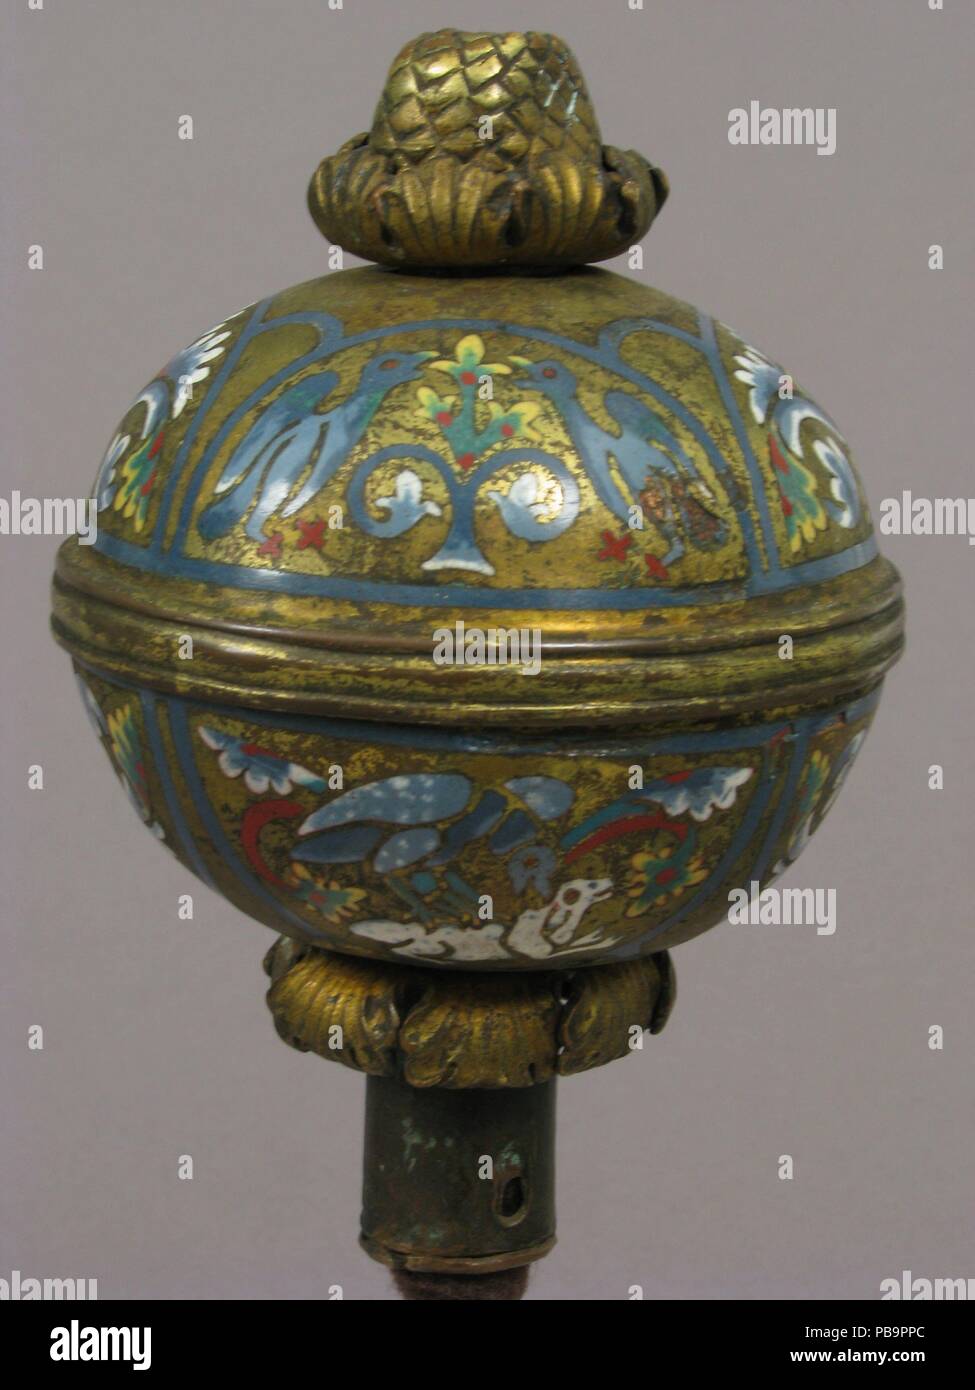 Spherical knop. Culture: German. Dimensions: Overall: 5 3/8 x 3 11/16 in. (13.7 x 9.4 cm). Date: late 12th century. Museum: Metropolitan Museum of Art, New York, USA. Stock Photo